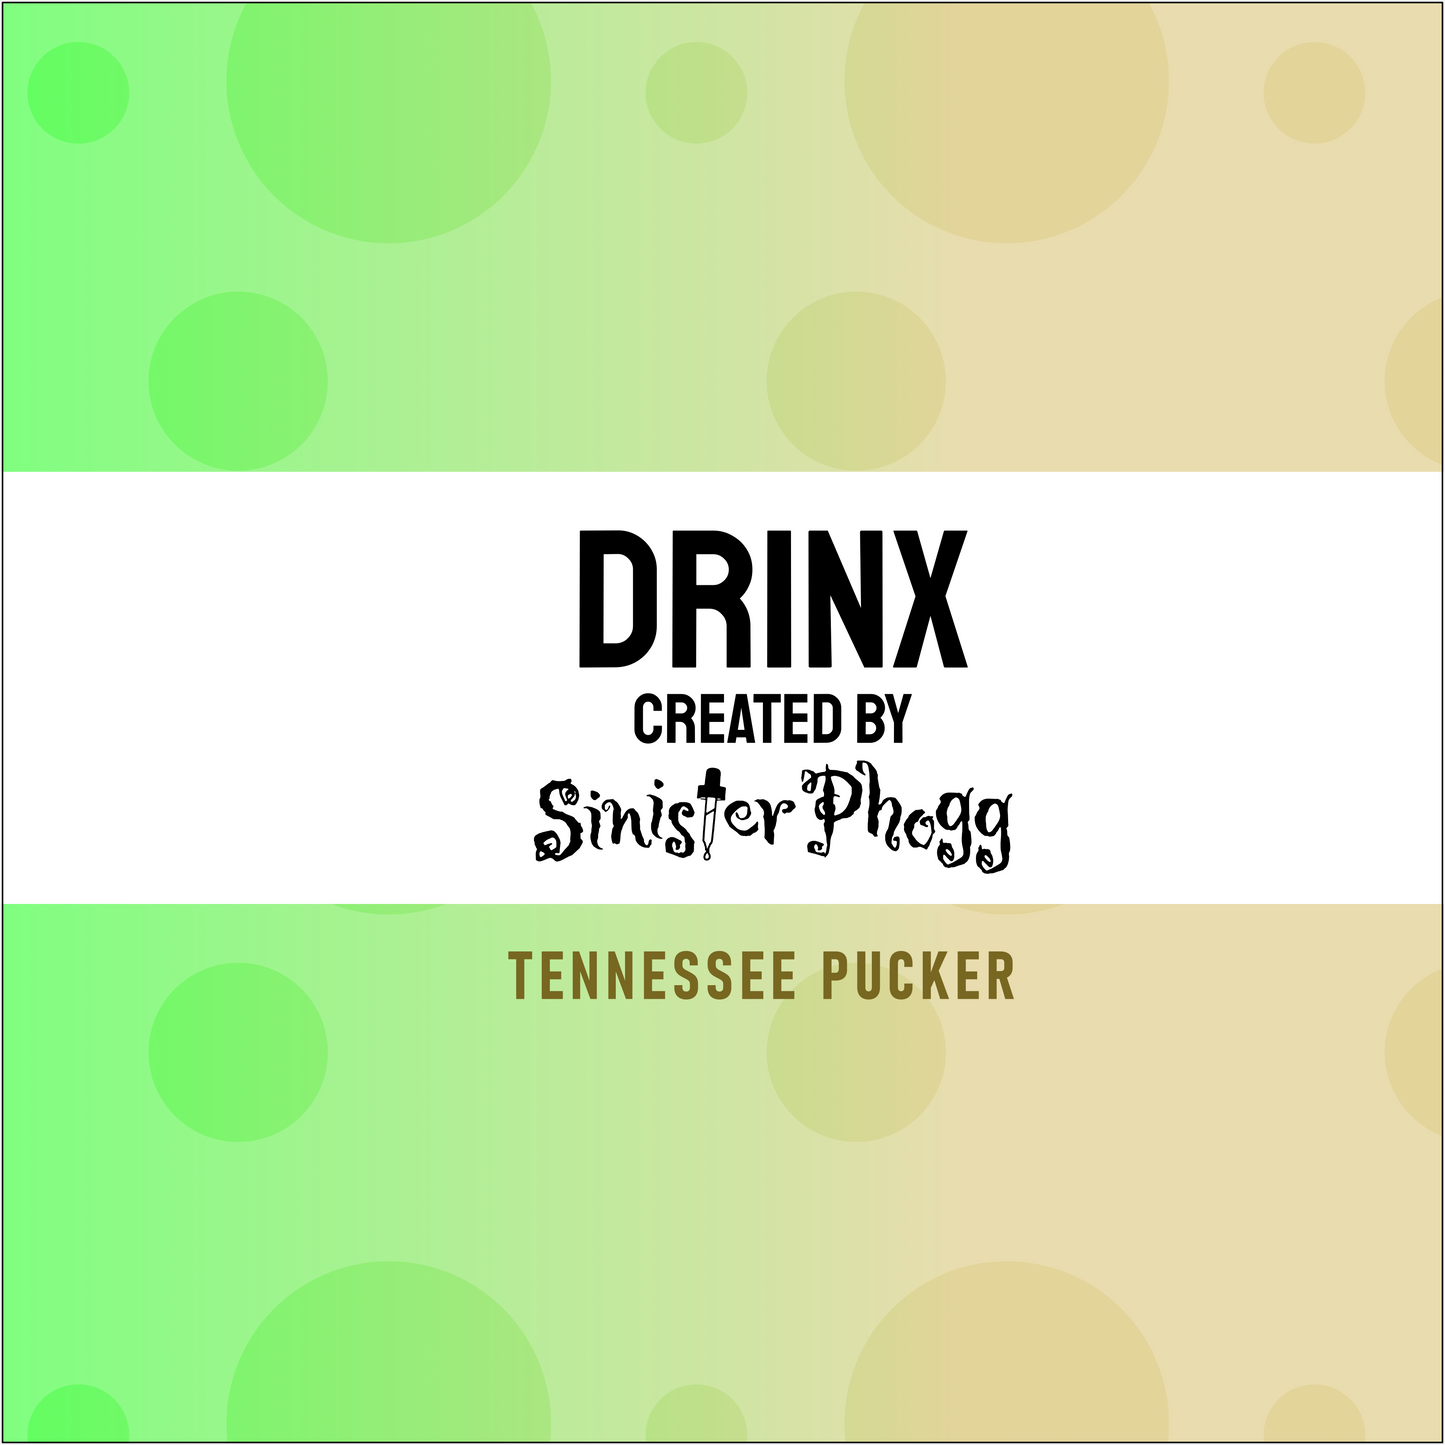 Tennessee Pucker - DRINX by Sinister Phogg